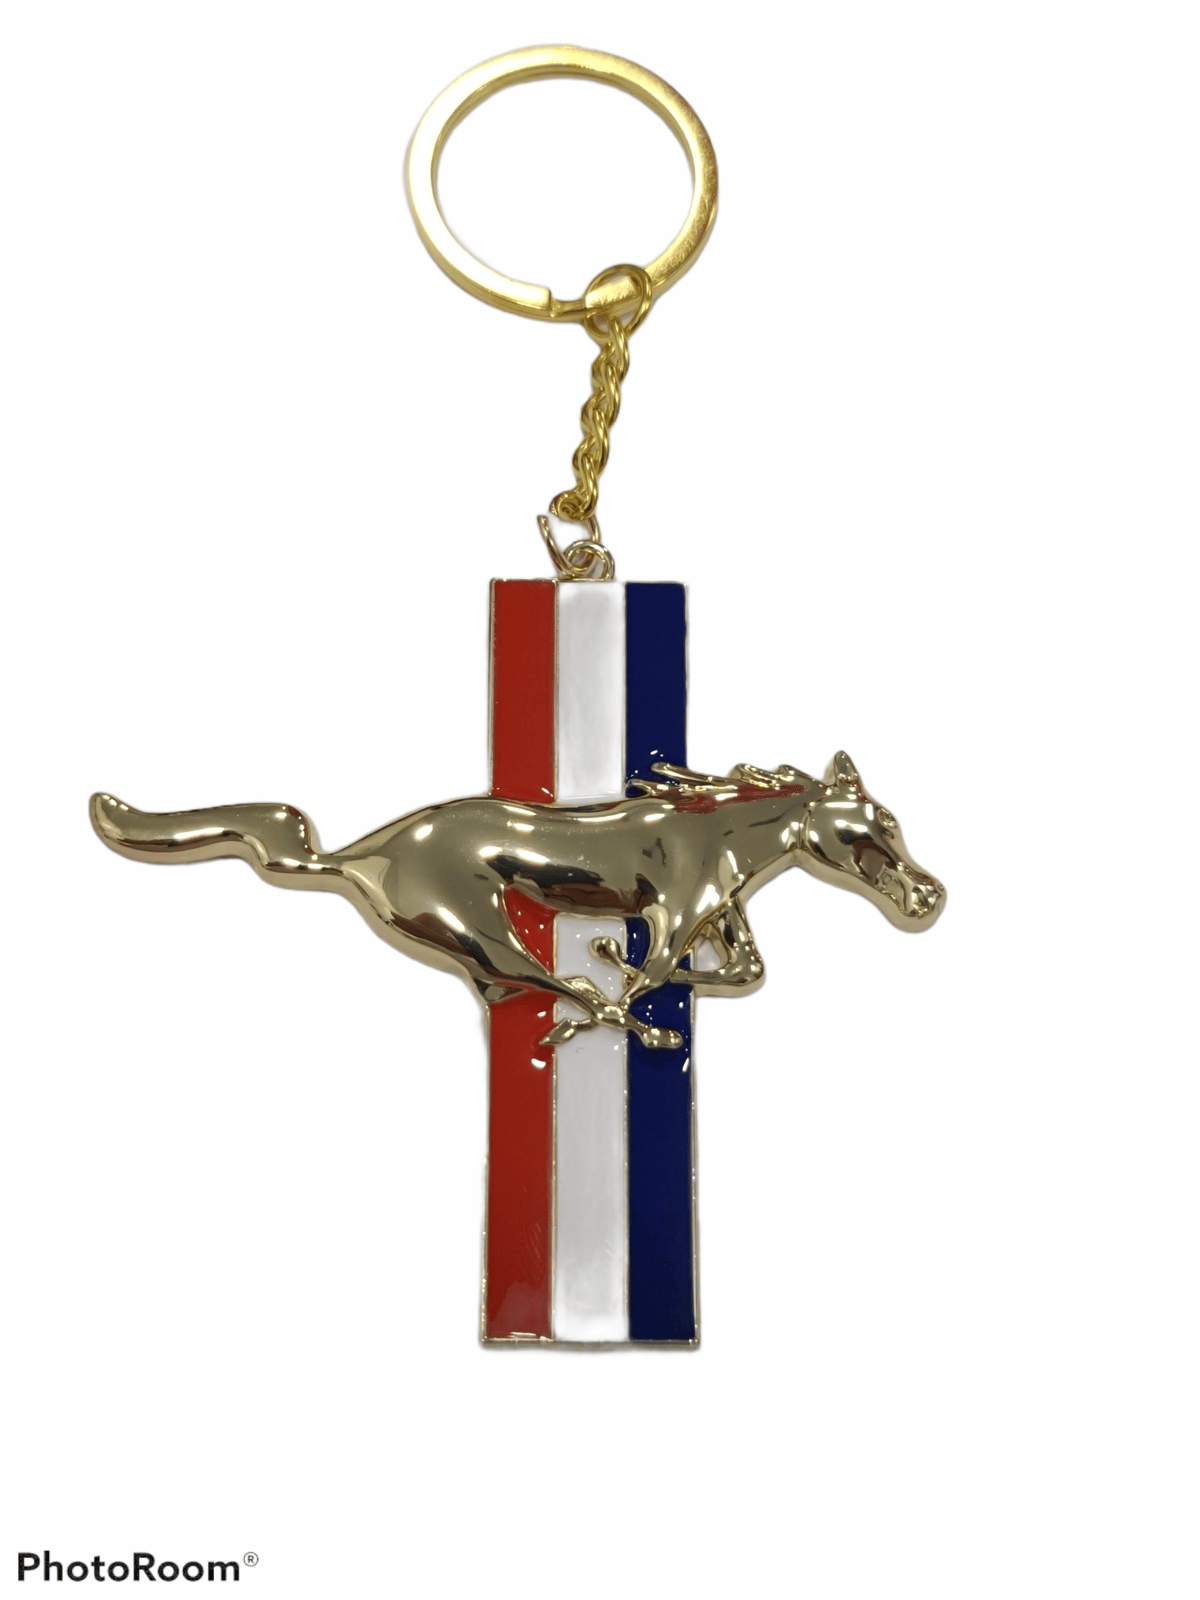 Image of Mustang key chains